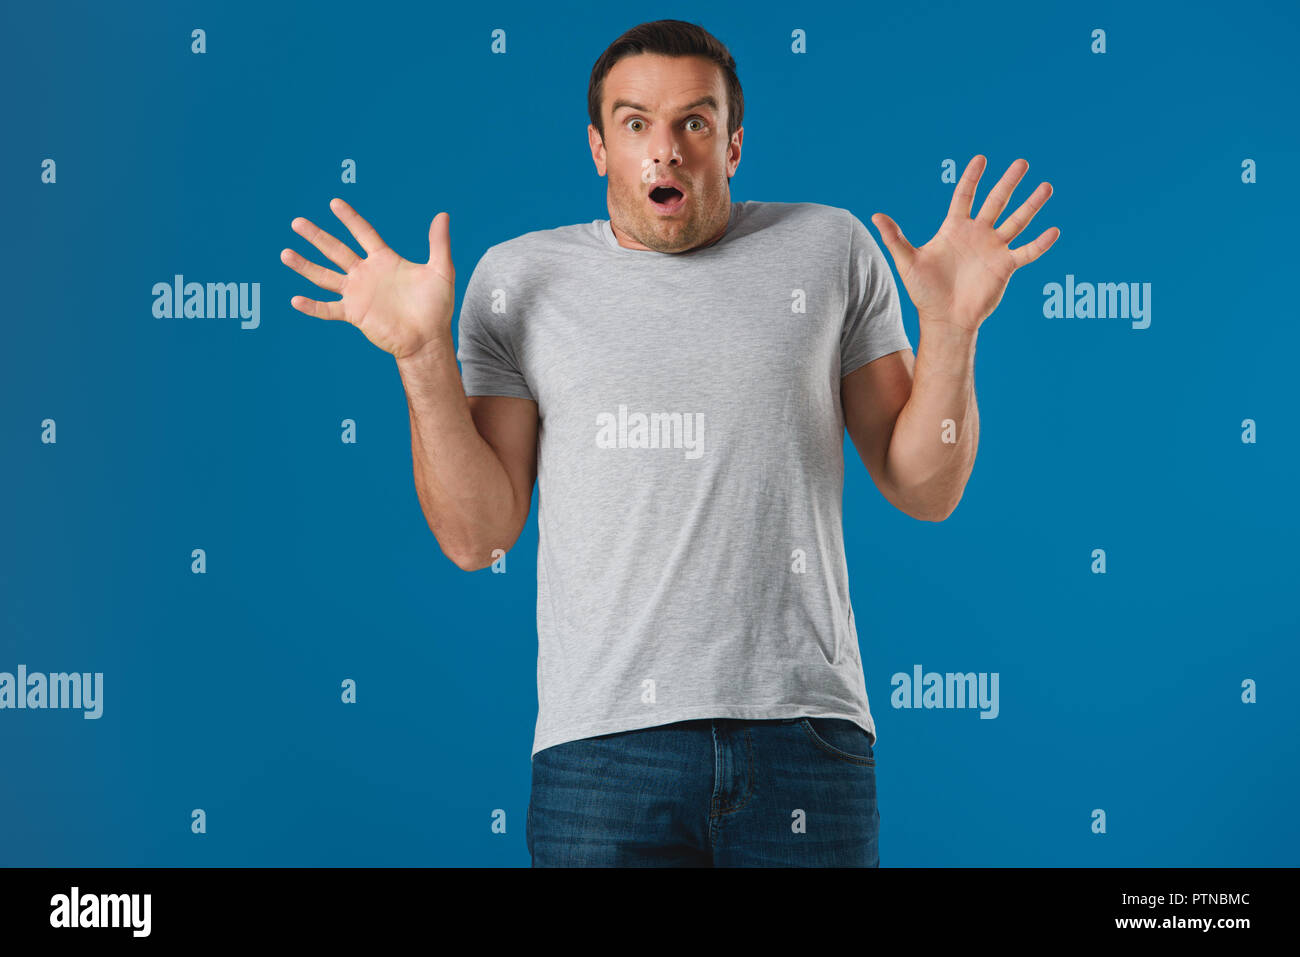 shocked man raising hands and looking at camera isolated on blue Stock Photo